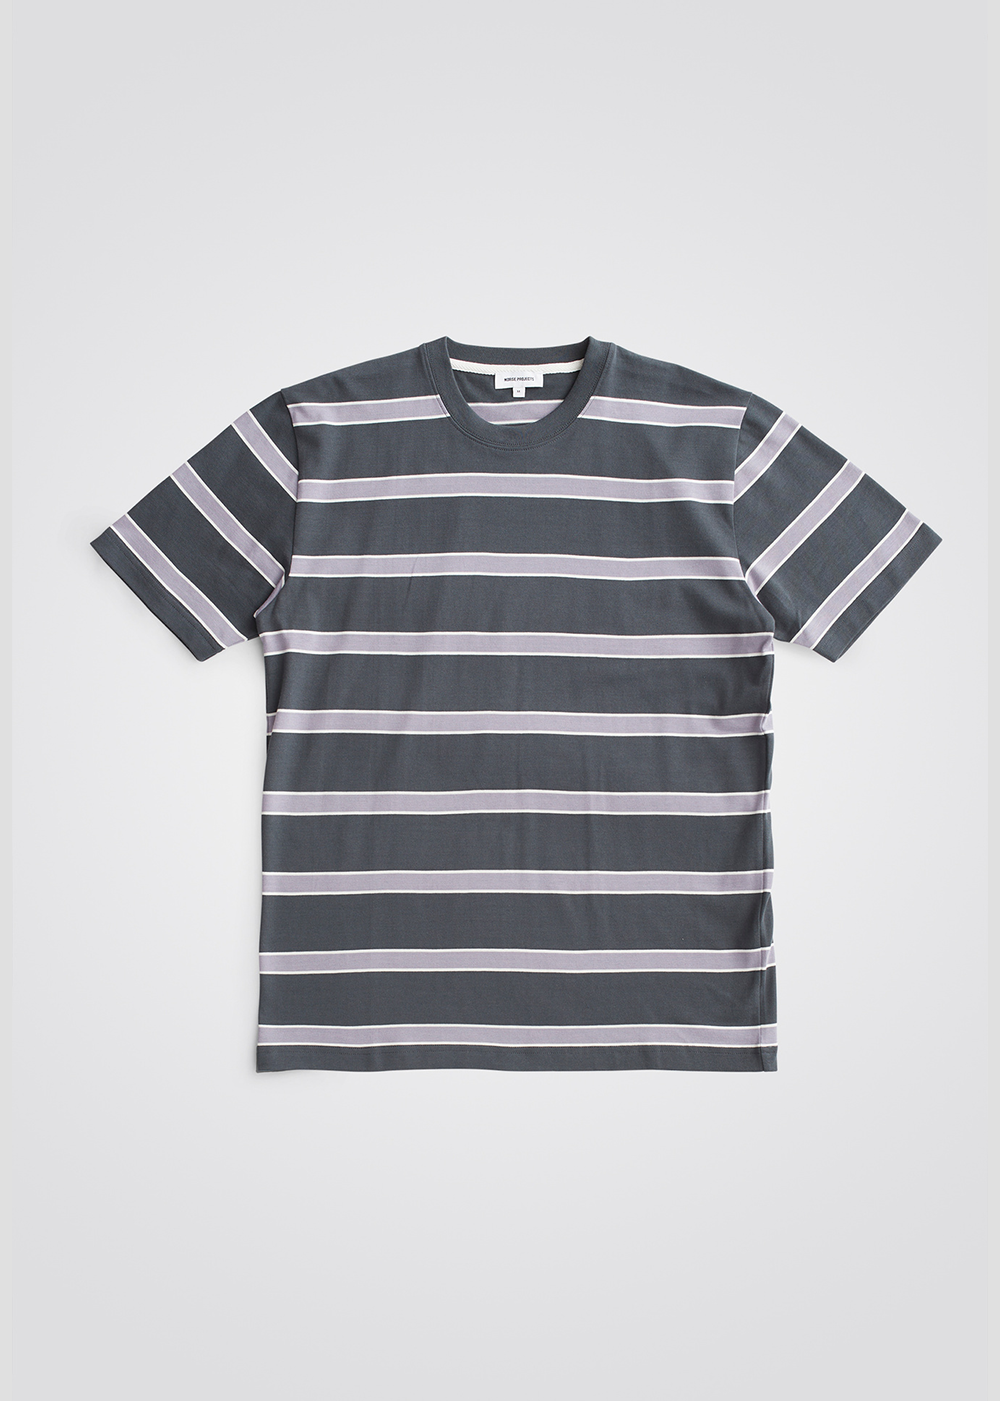 Front view of the Johannes Organic Multicolor Striped T-Shirt by Norse Projects in Battleship Grey.